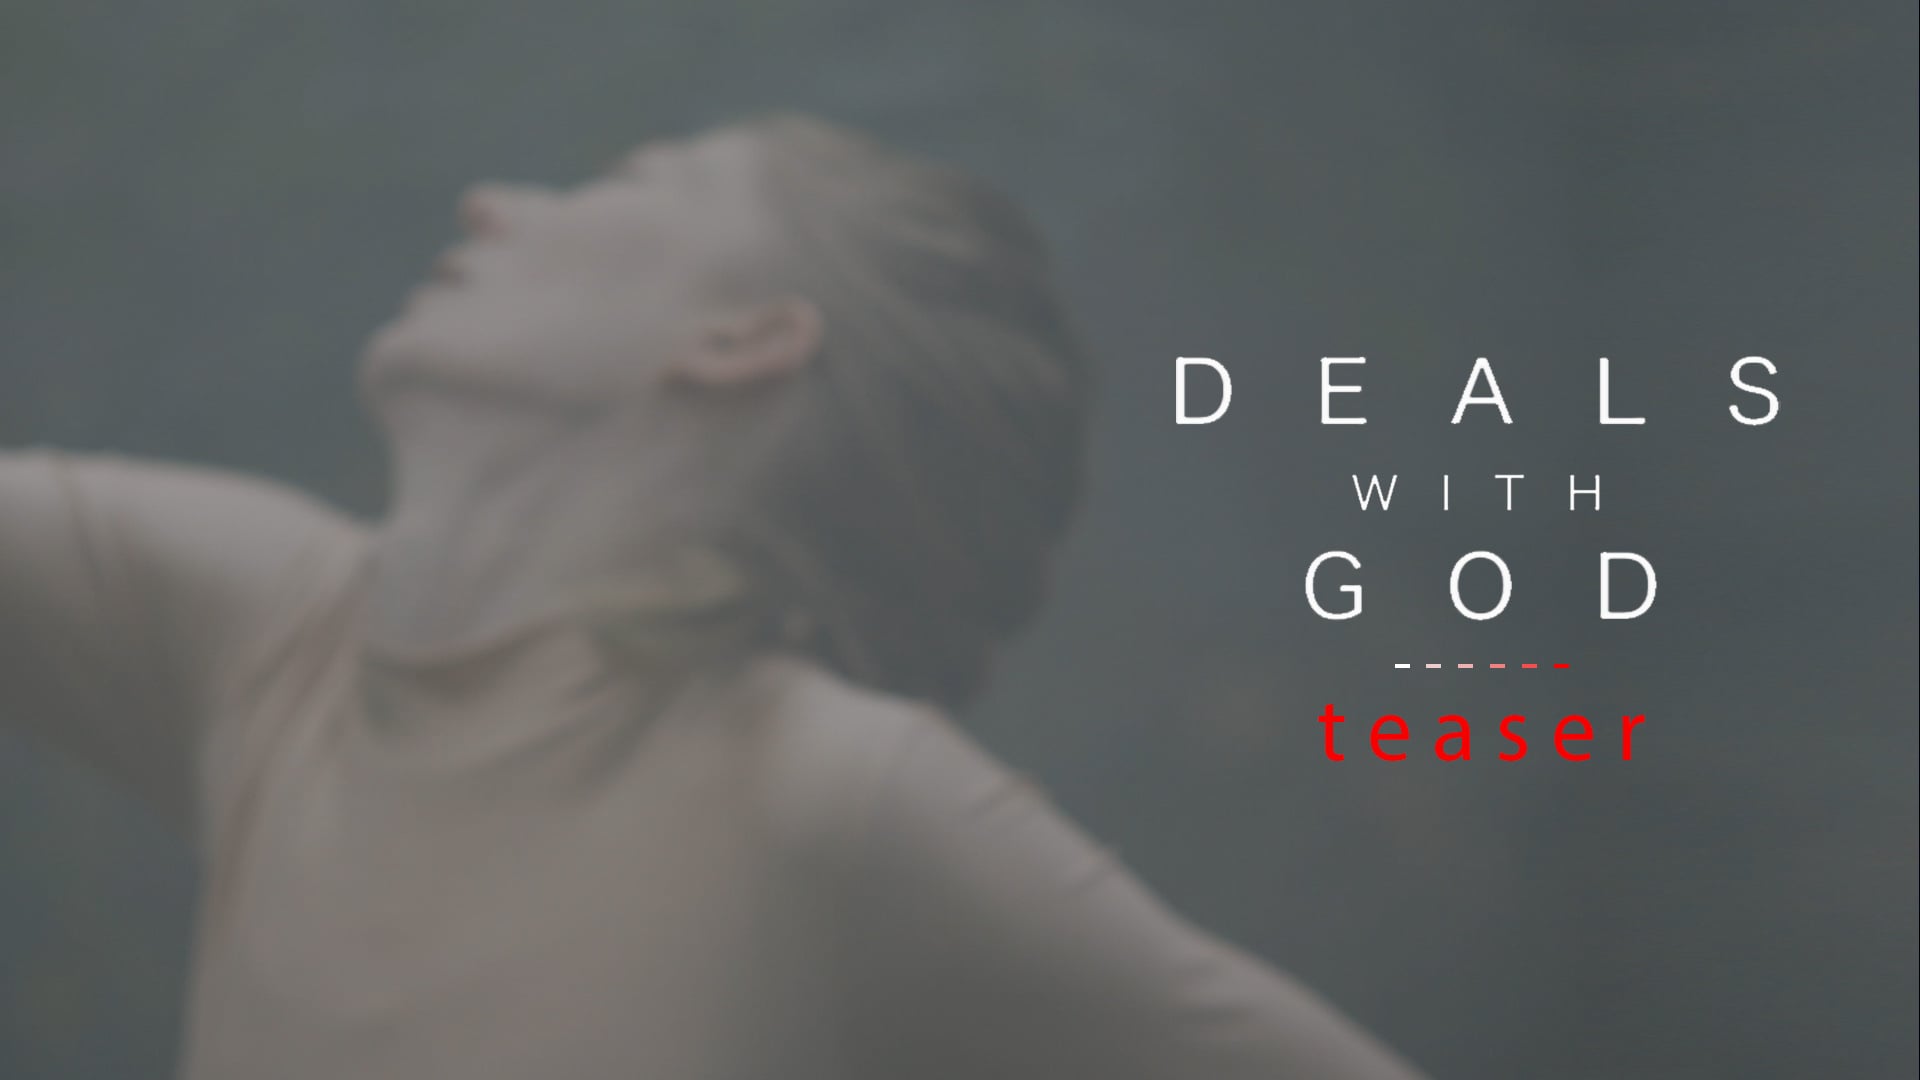 "Deals with God" - Contemporary Dance -Teaser (2017)